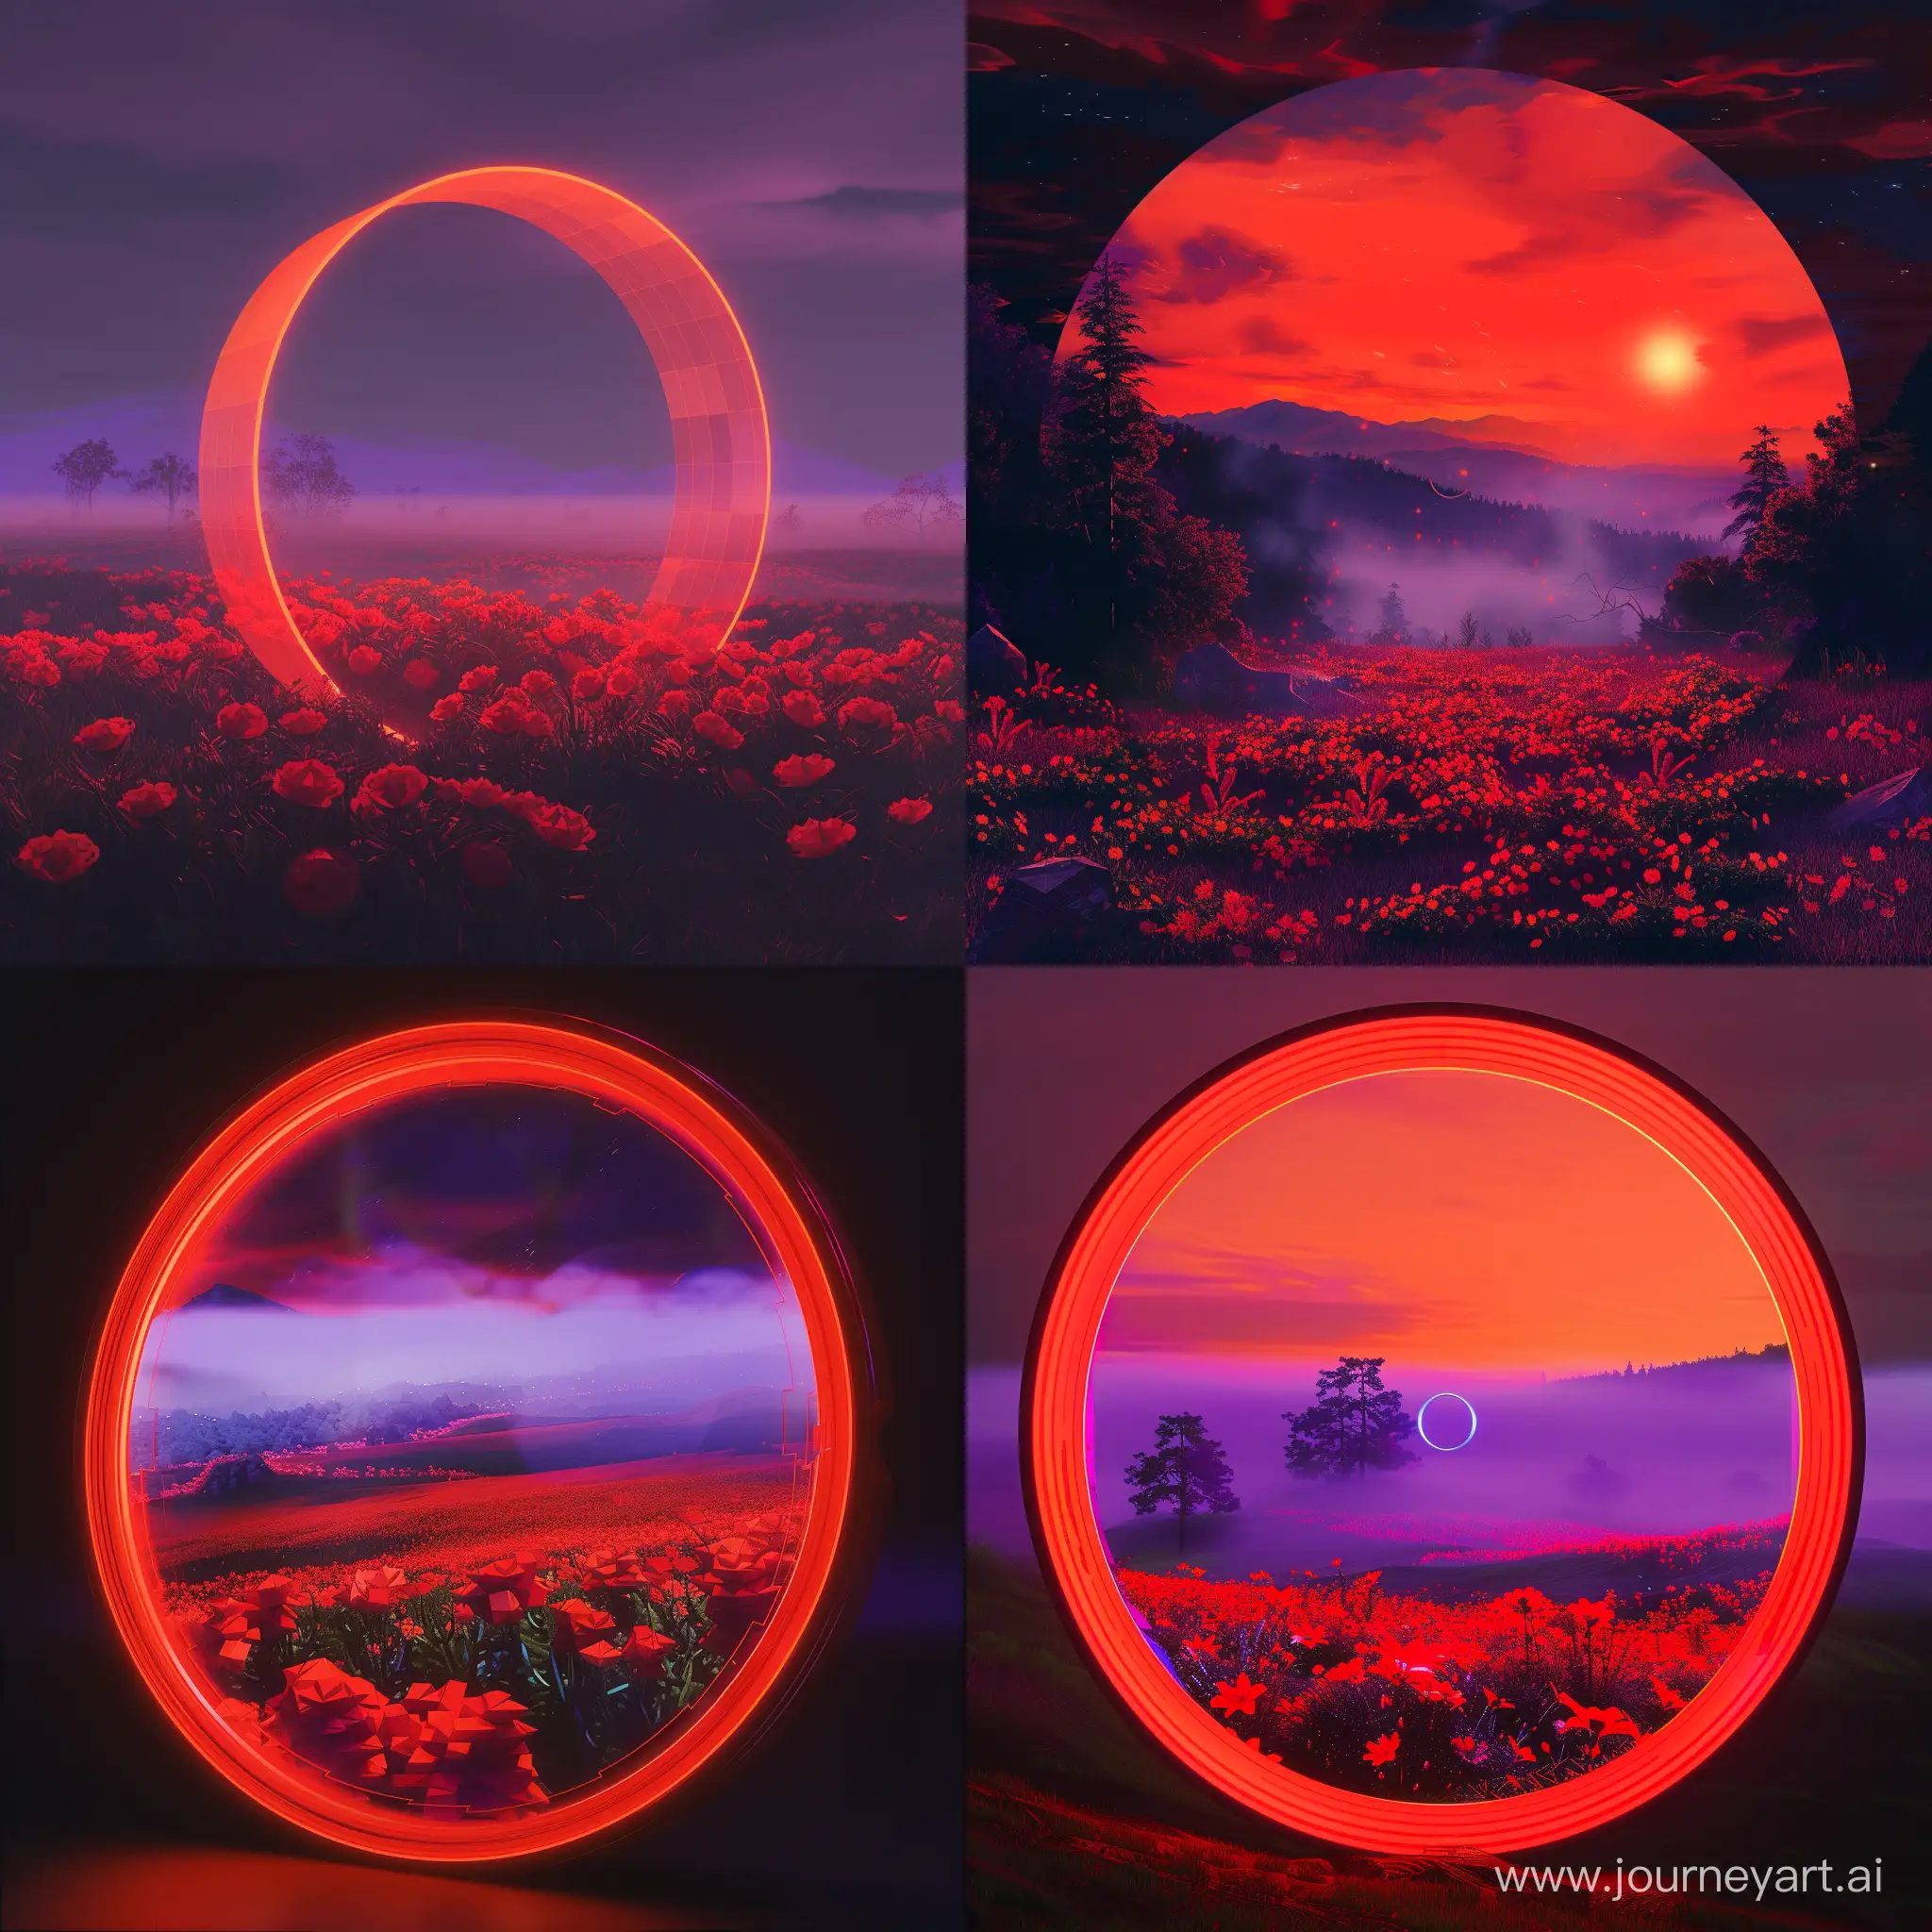 red orange purple 1990s video game flower field landscape scene, nostalgia, nighttime, fog, haunting, low poly, computer graphics, digital glitch, all inside a Compact disc shape